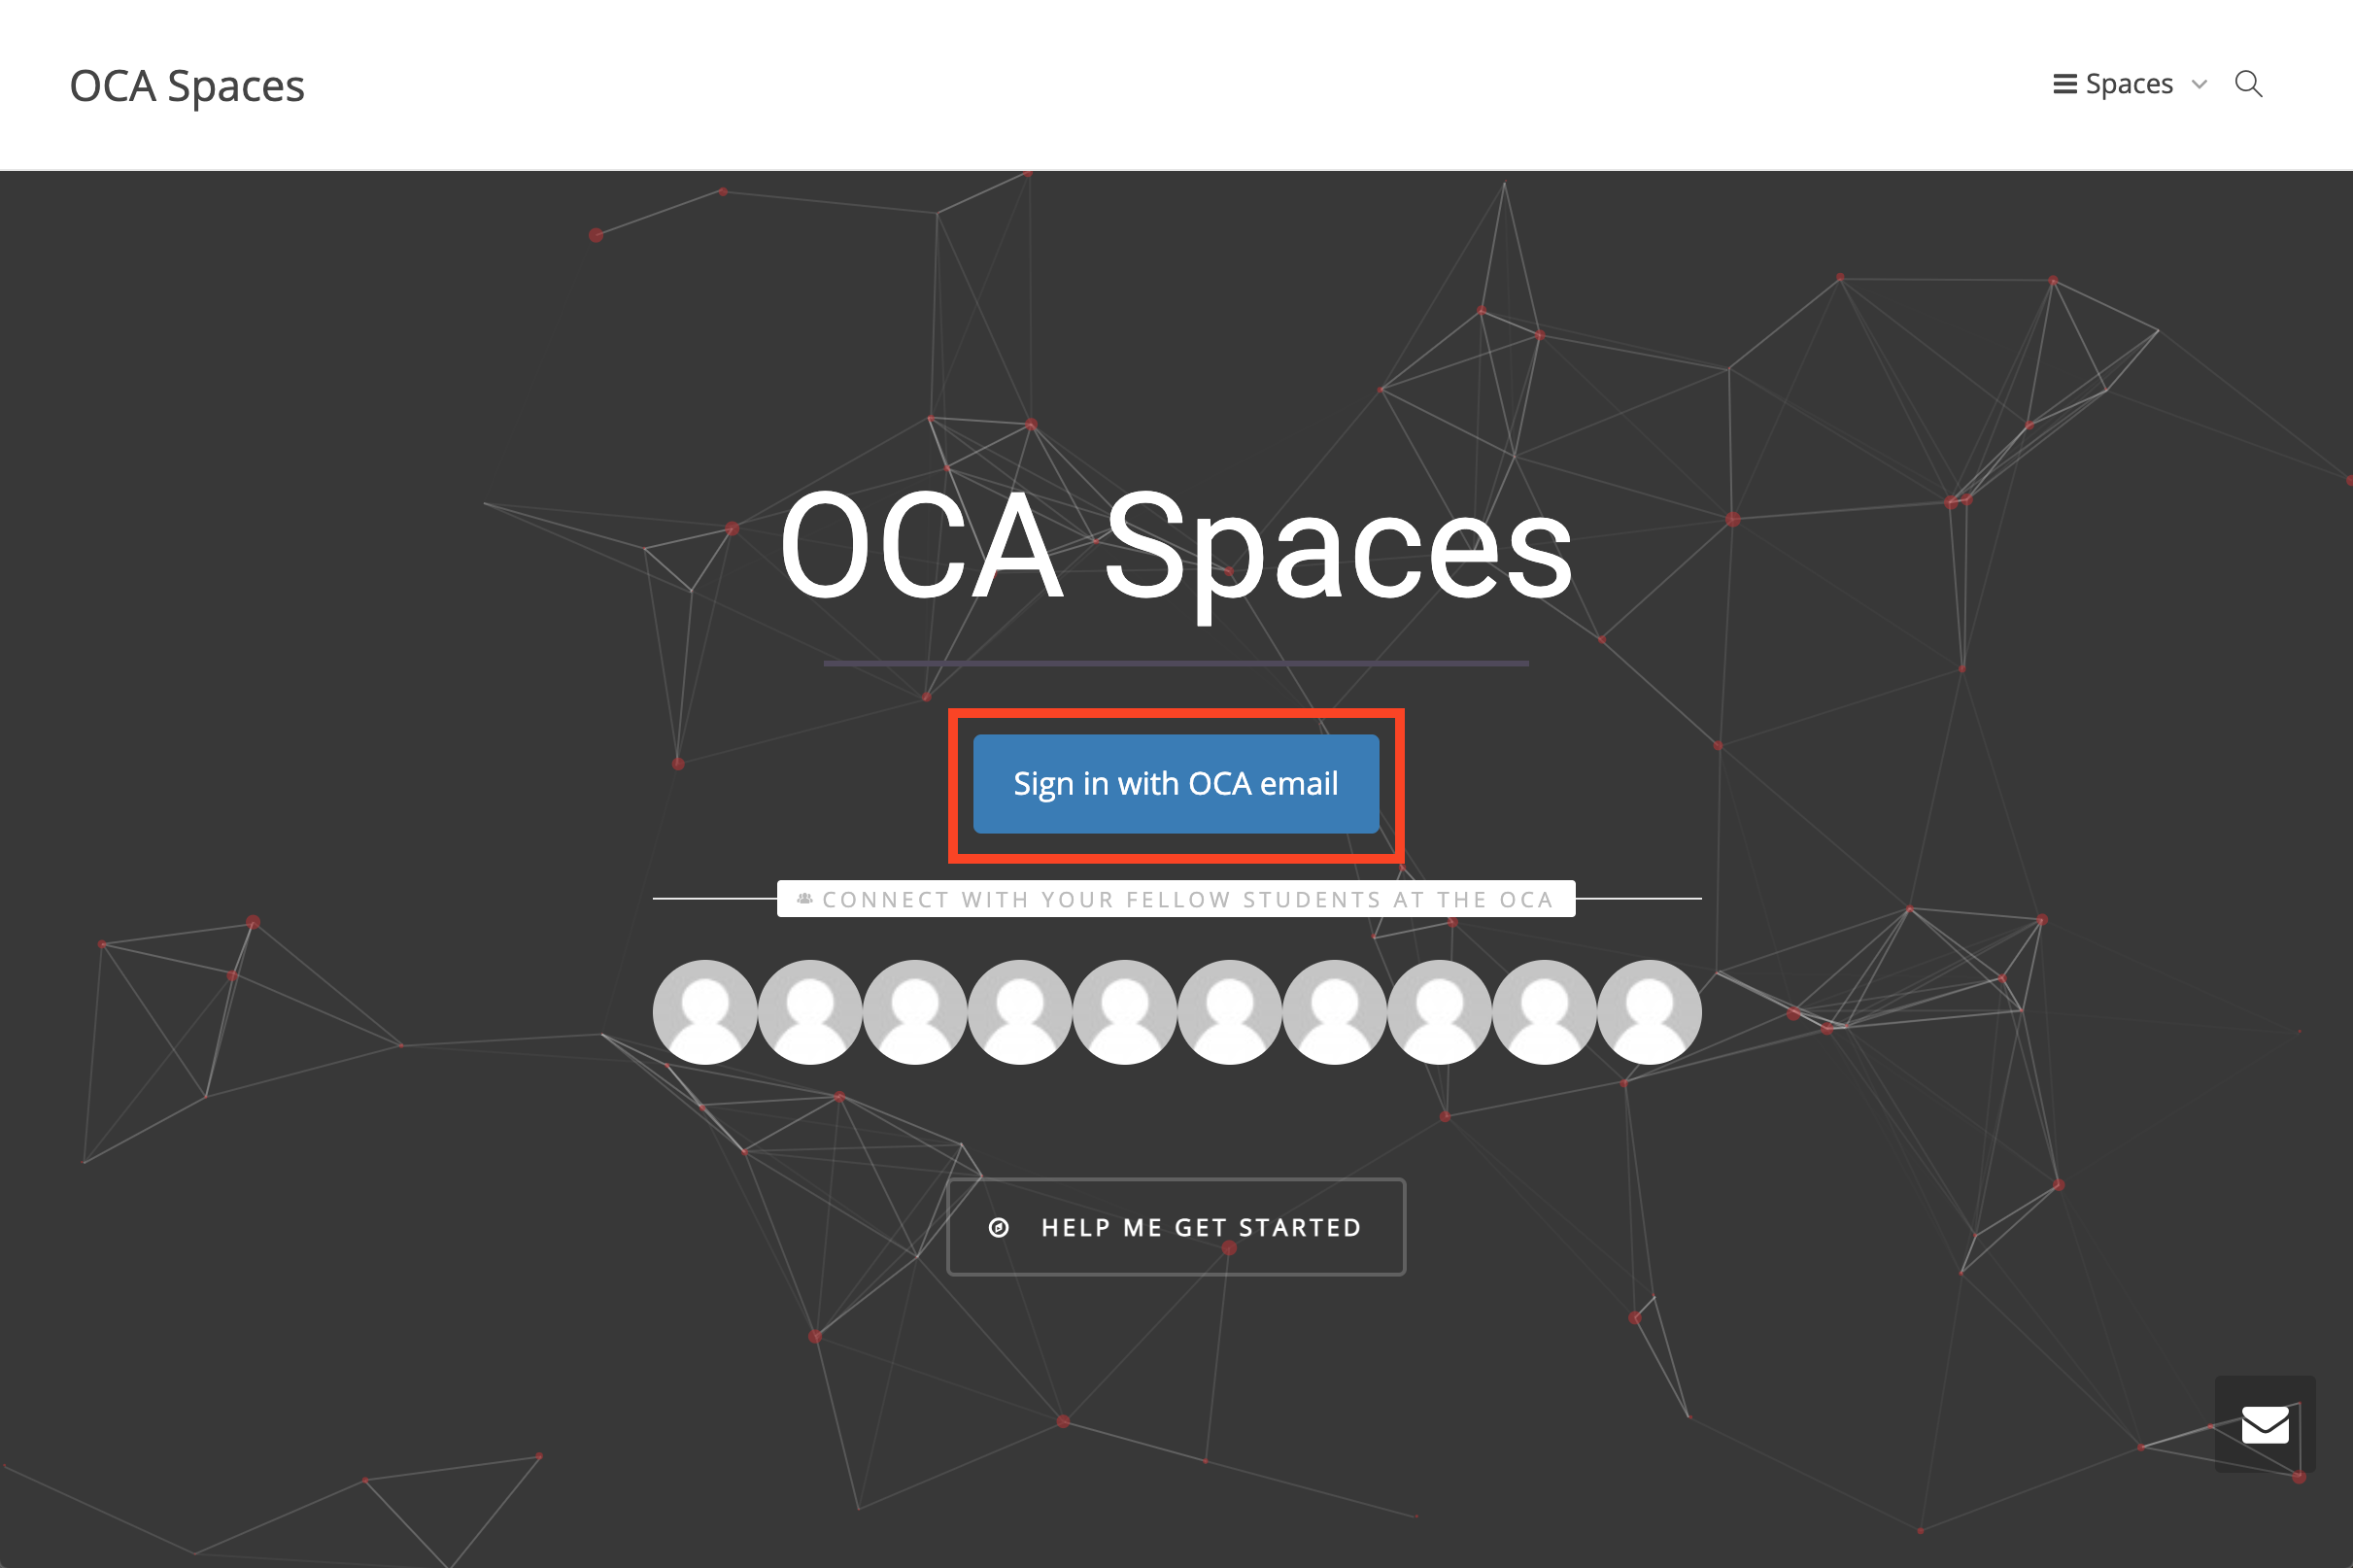 The OCA Spaces homepage, with the 'Sign in with OCA Spaces' option highlighted in red.